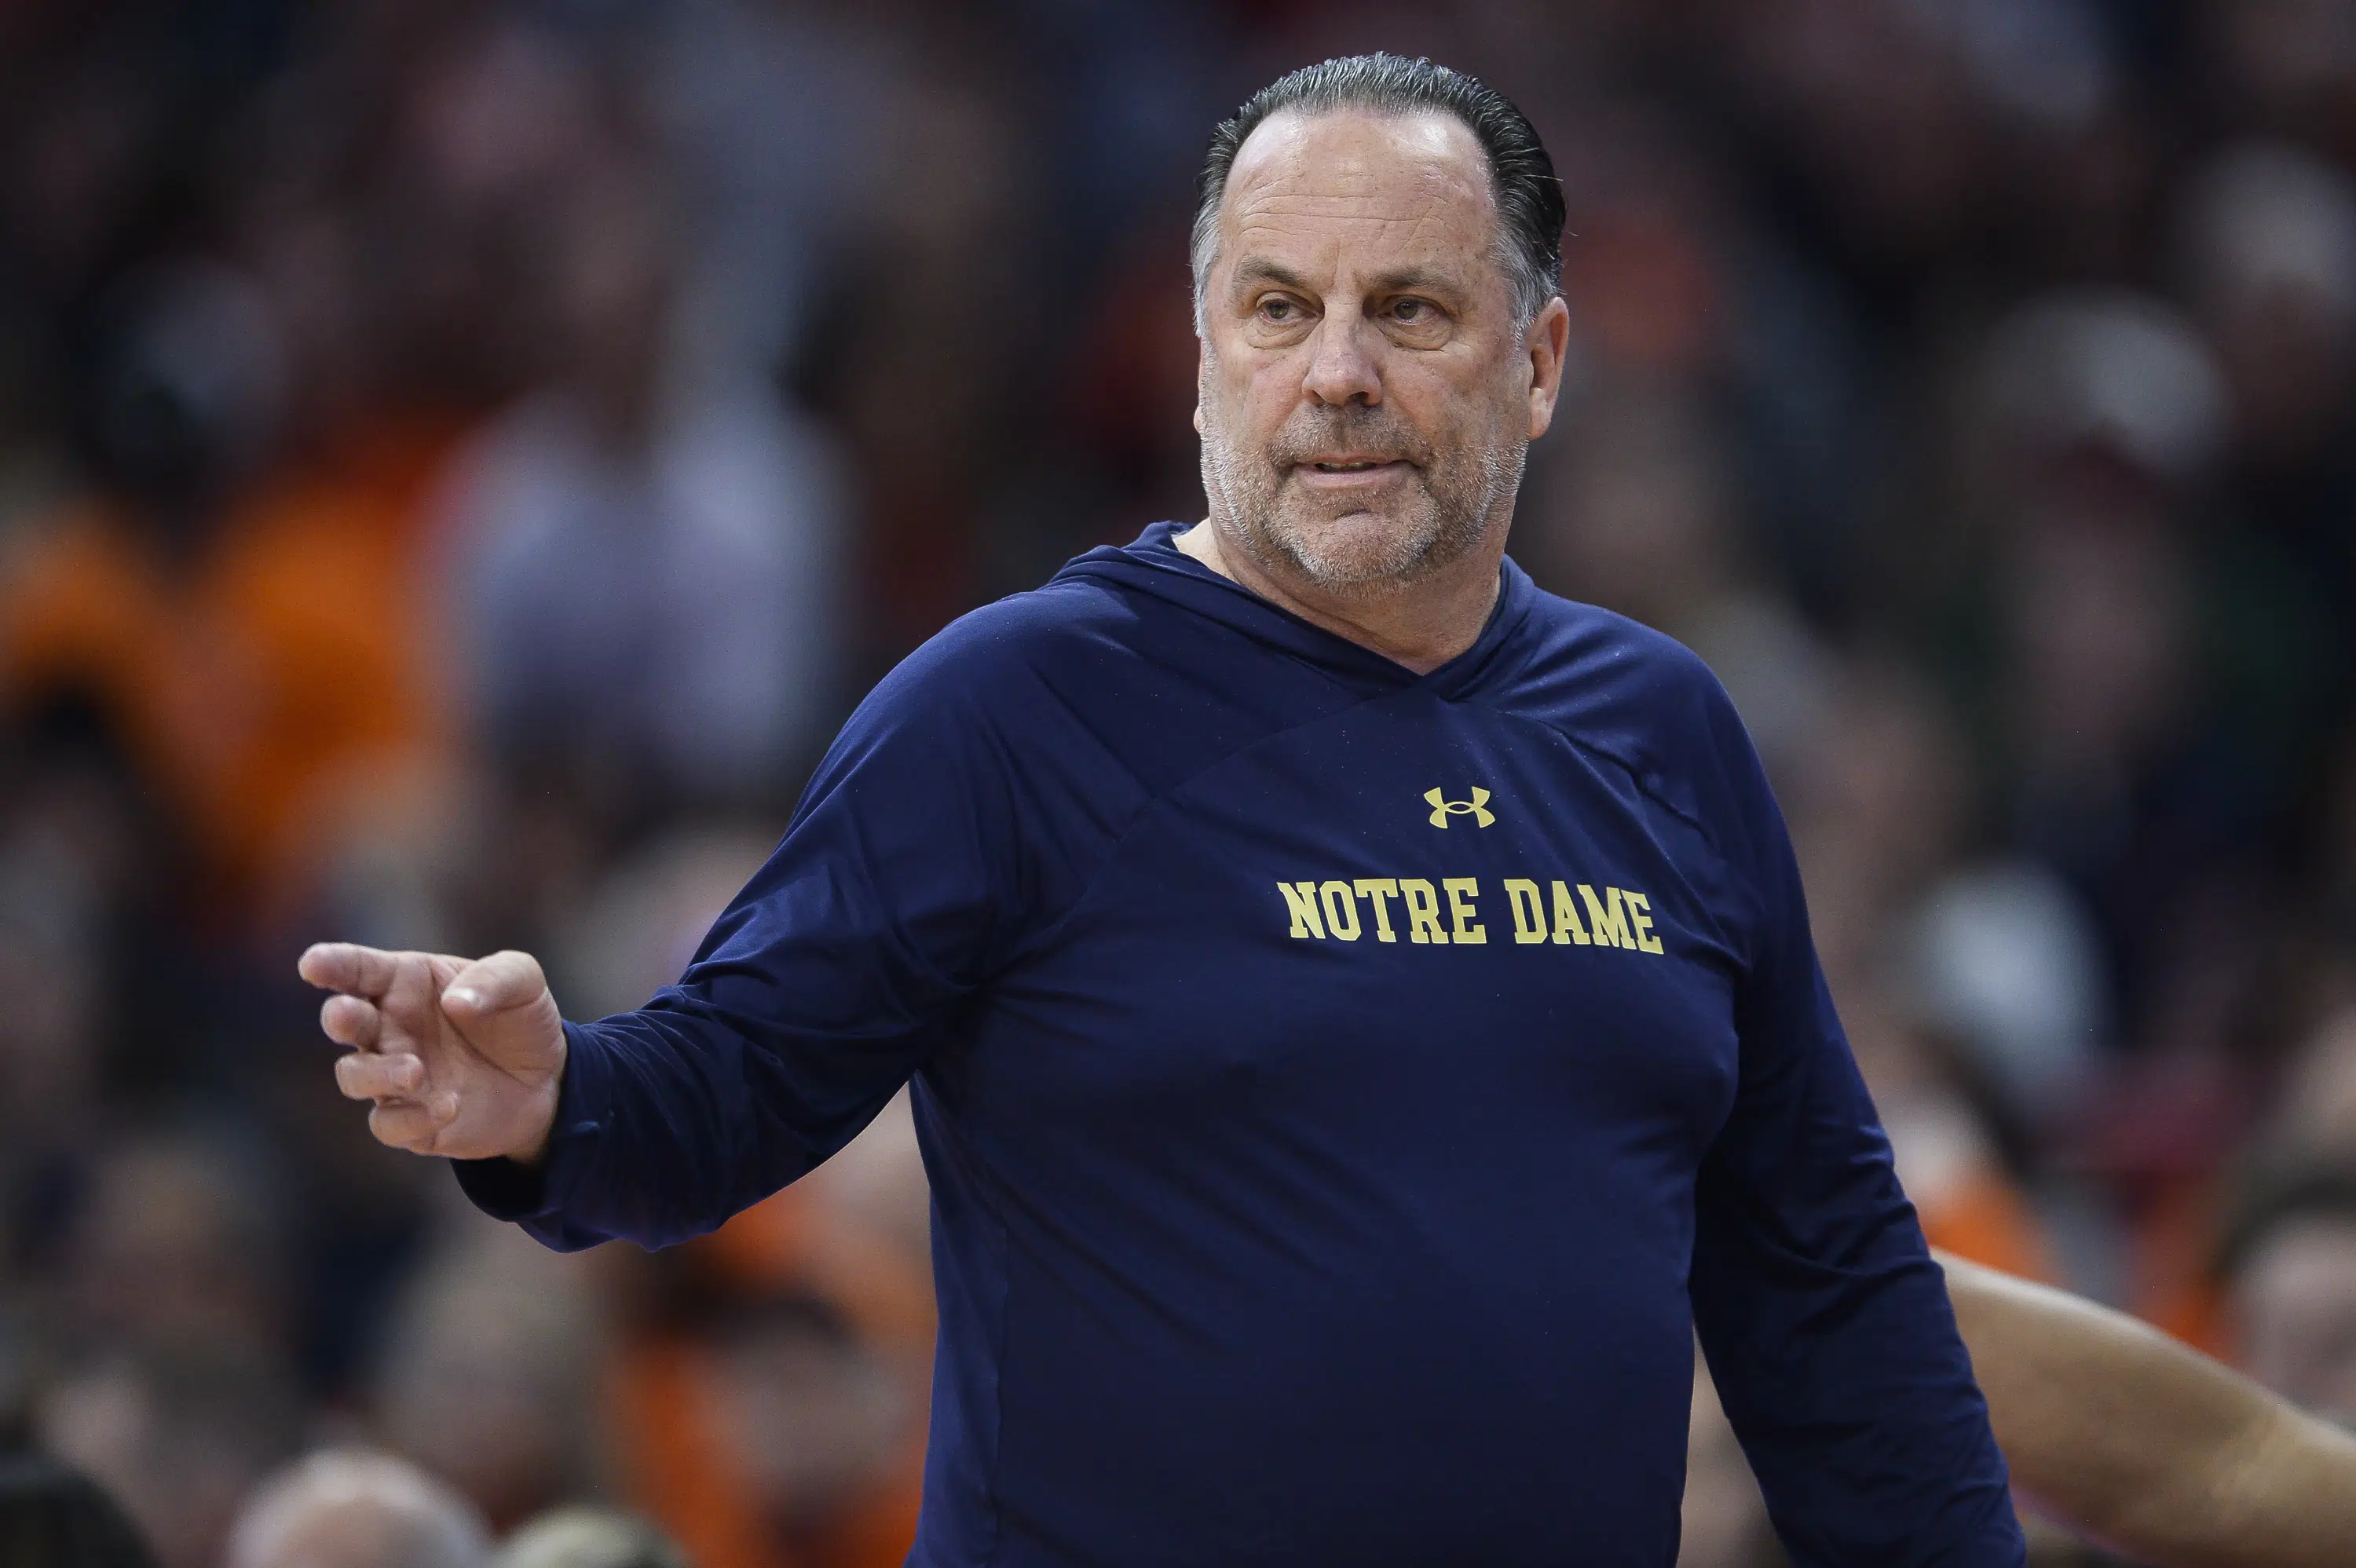 Notre Dame coach Mike Brey stepping down after this season | AP News